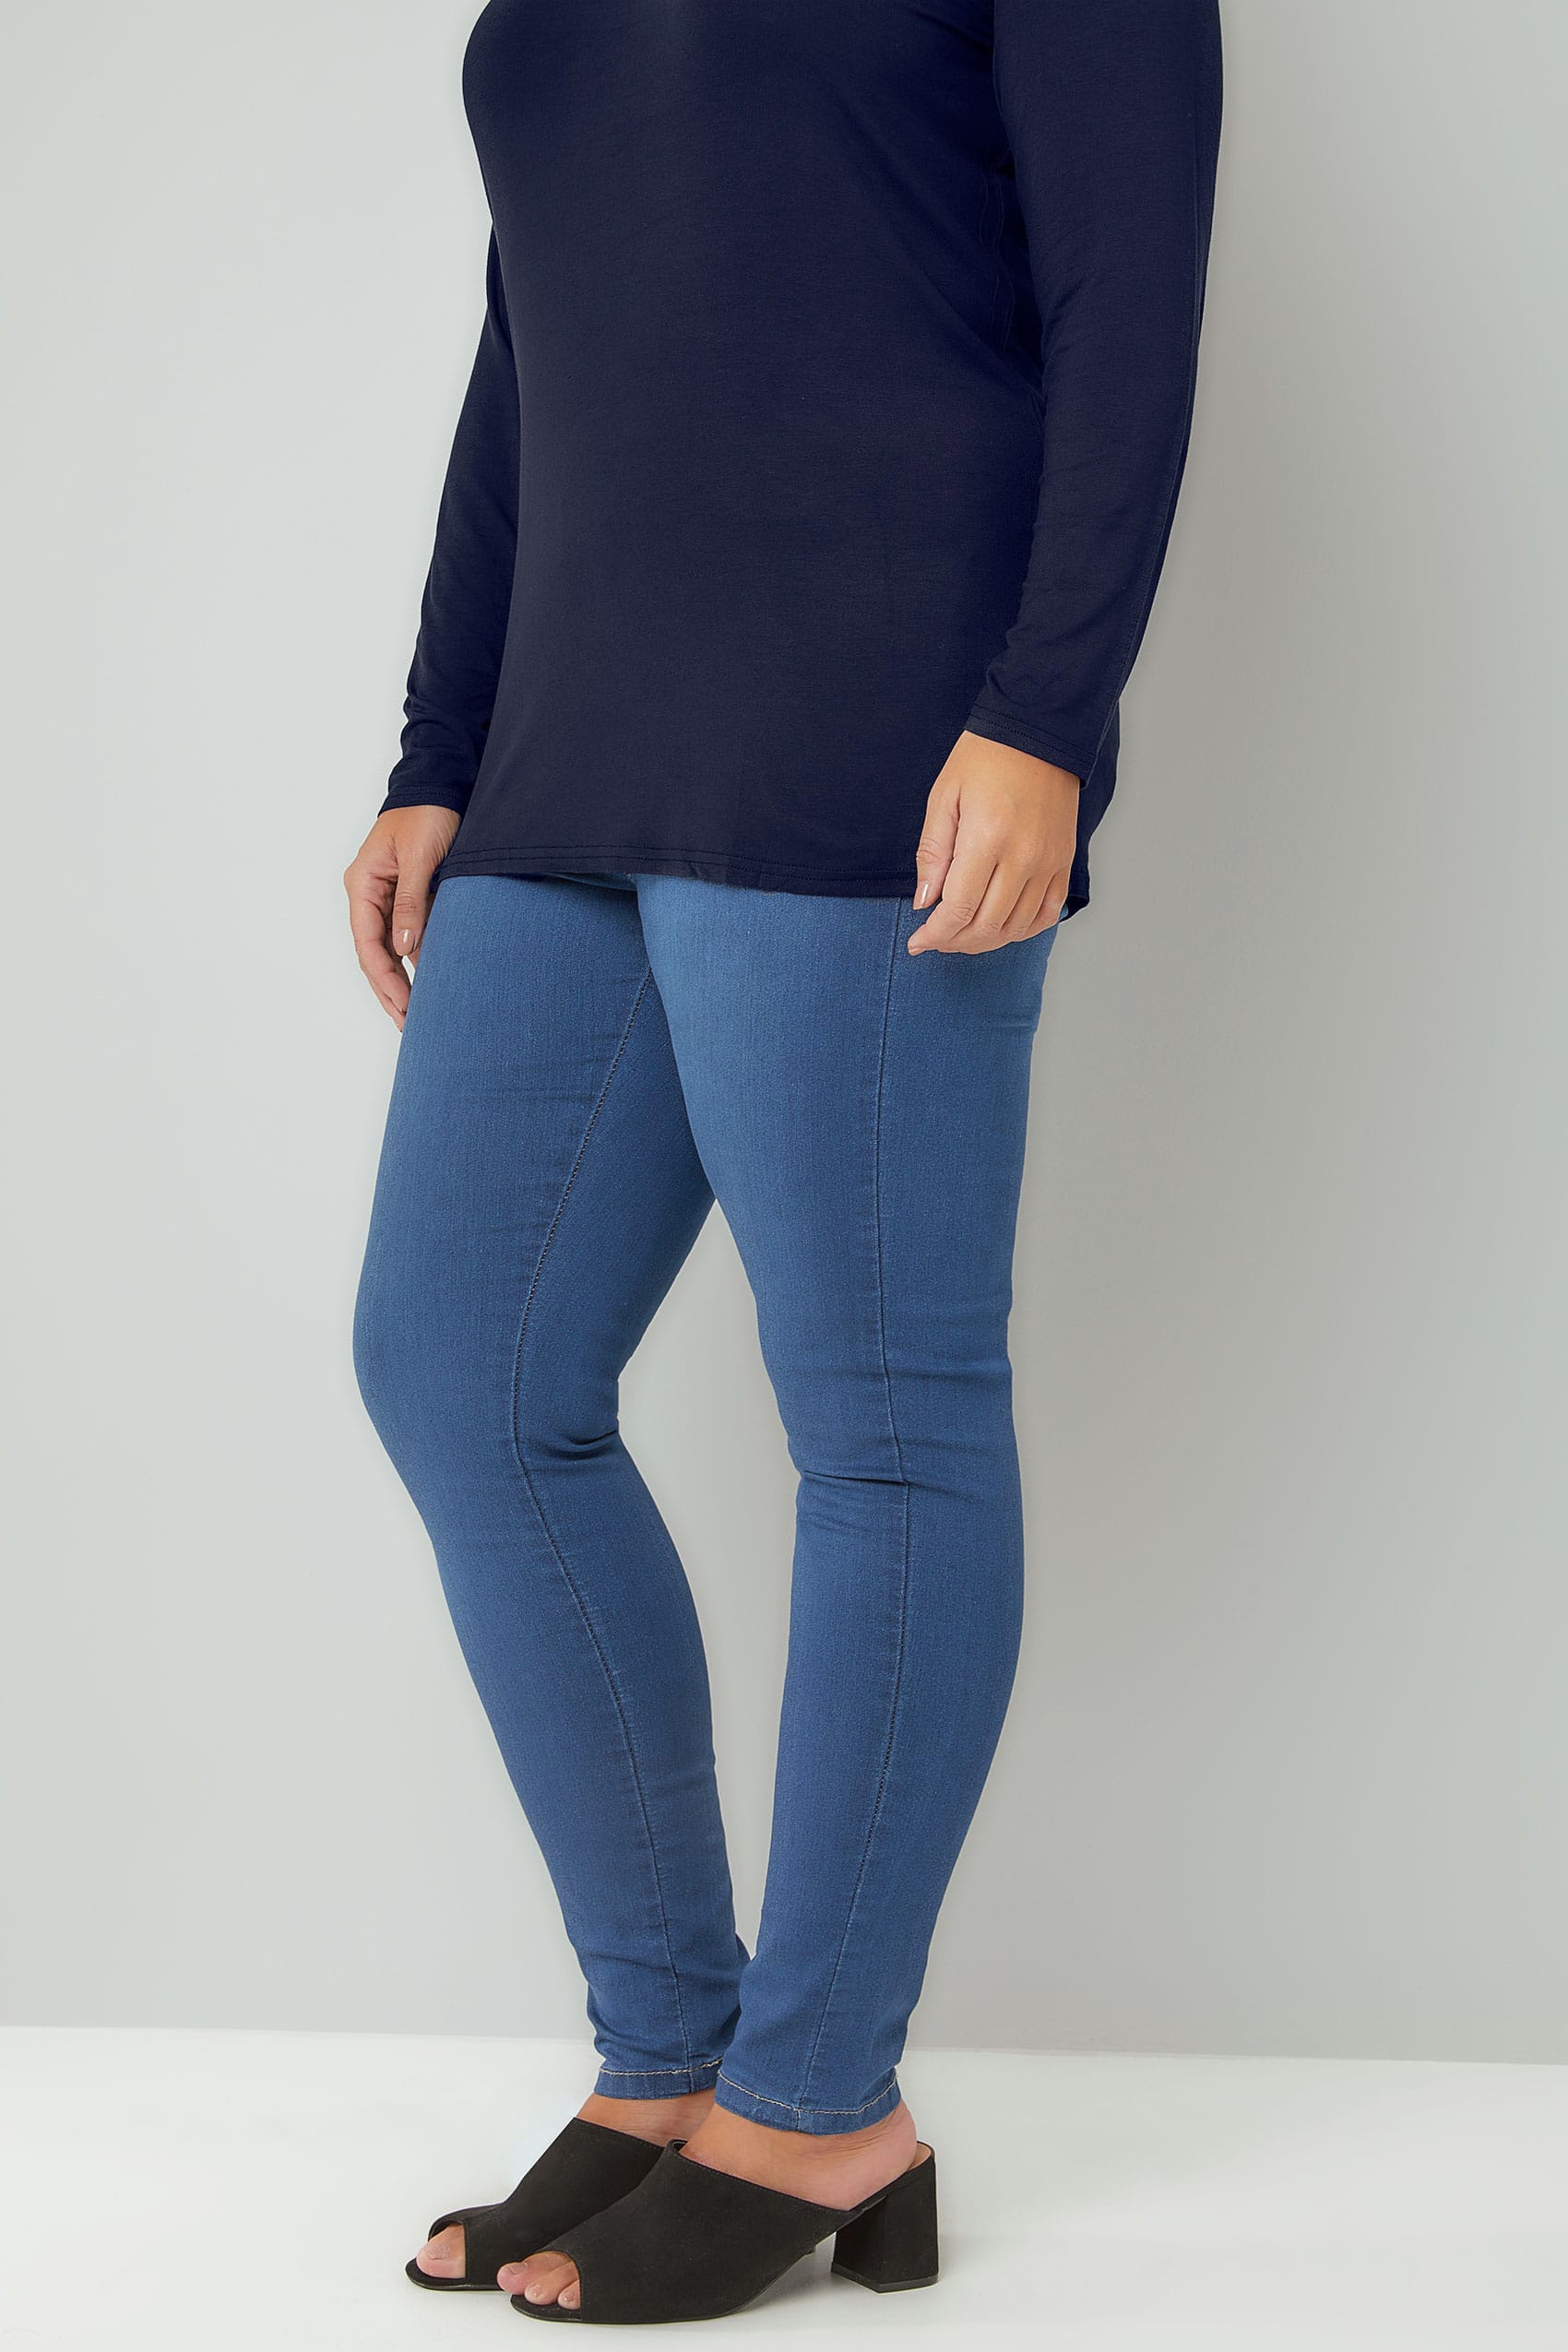 Mid Blue Pull On LOLA Jeggings, Plus size 16 to 32